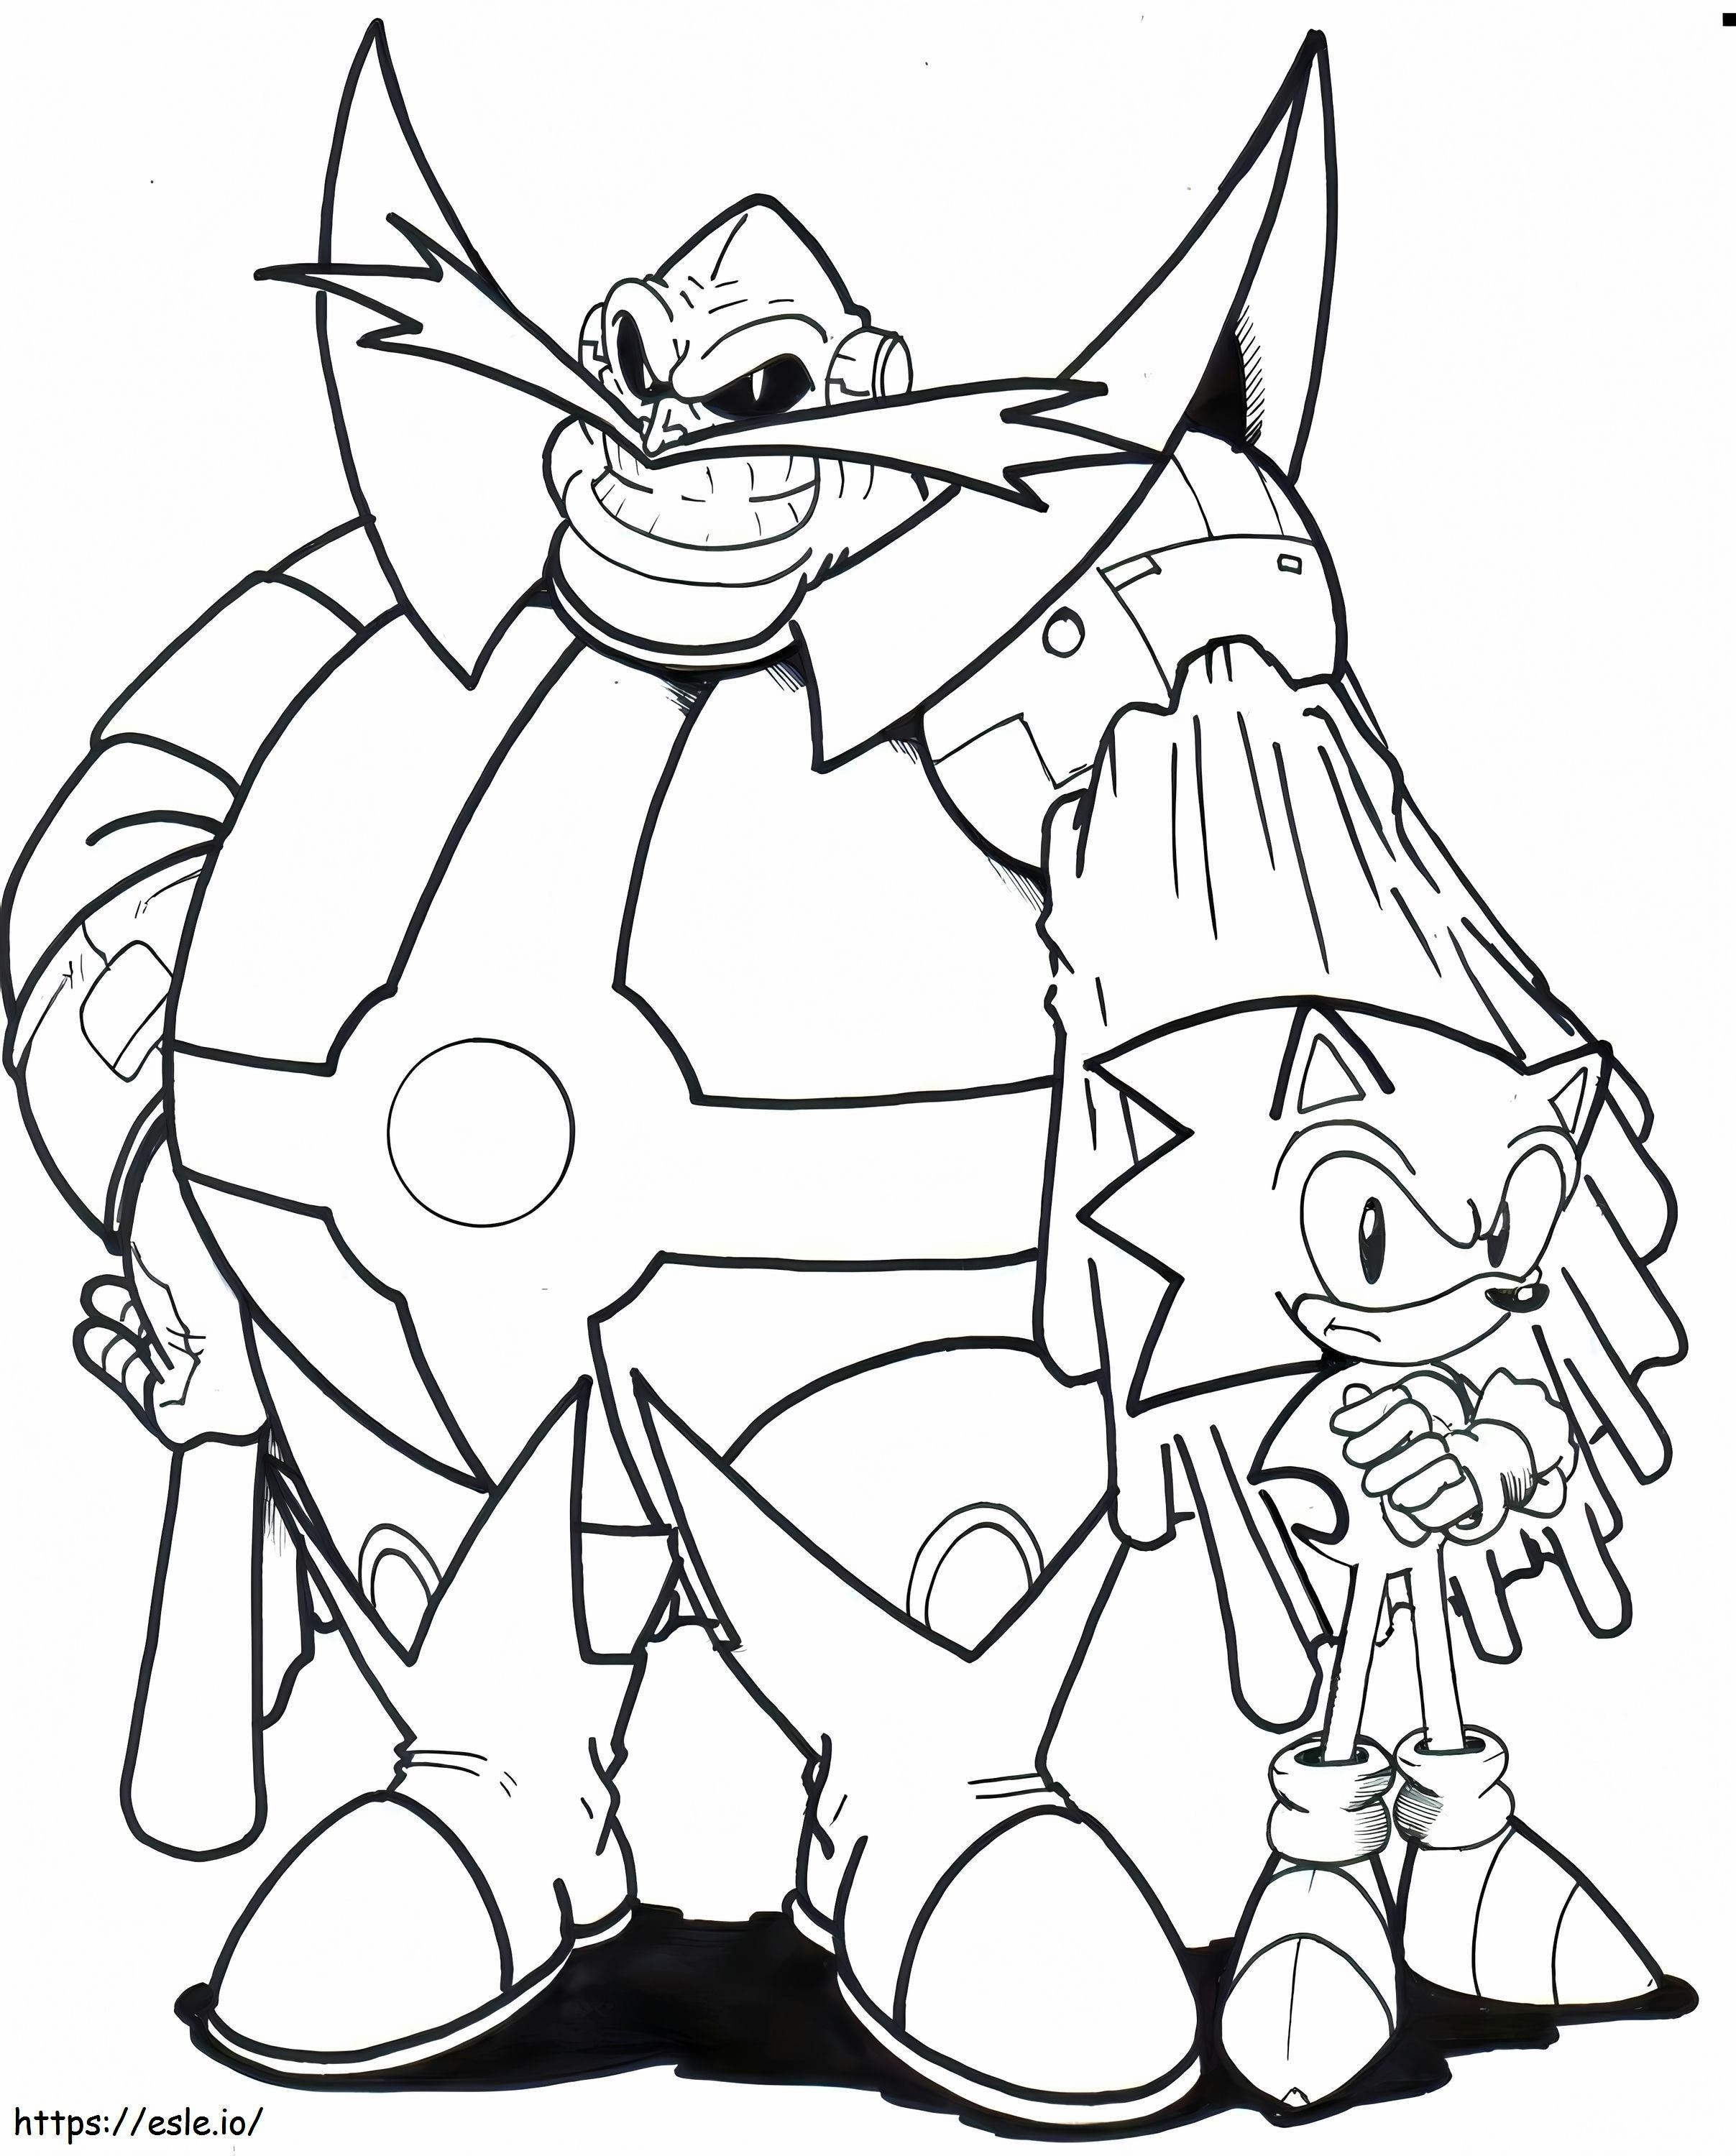 1573433515 Dr Eggman Remarkable Archie Dr Ivo Robotnik And Sonic La By Trunks24 coloring page